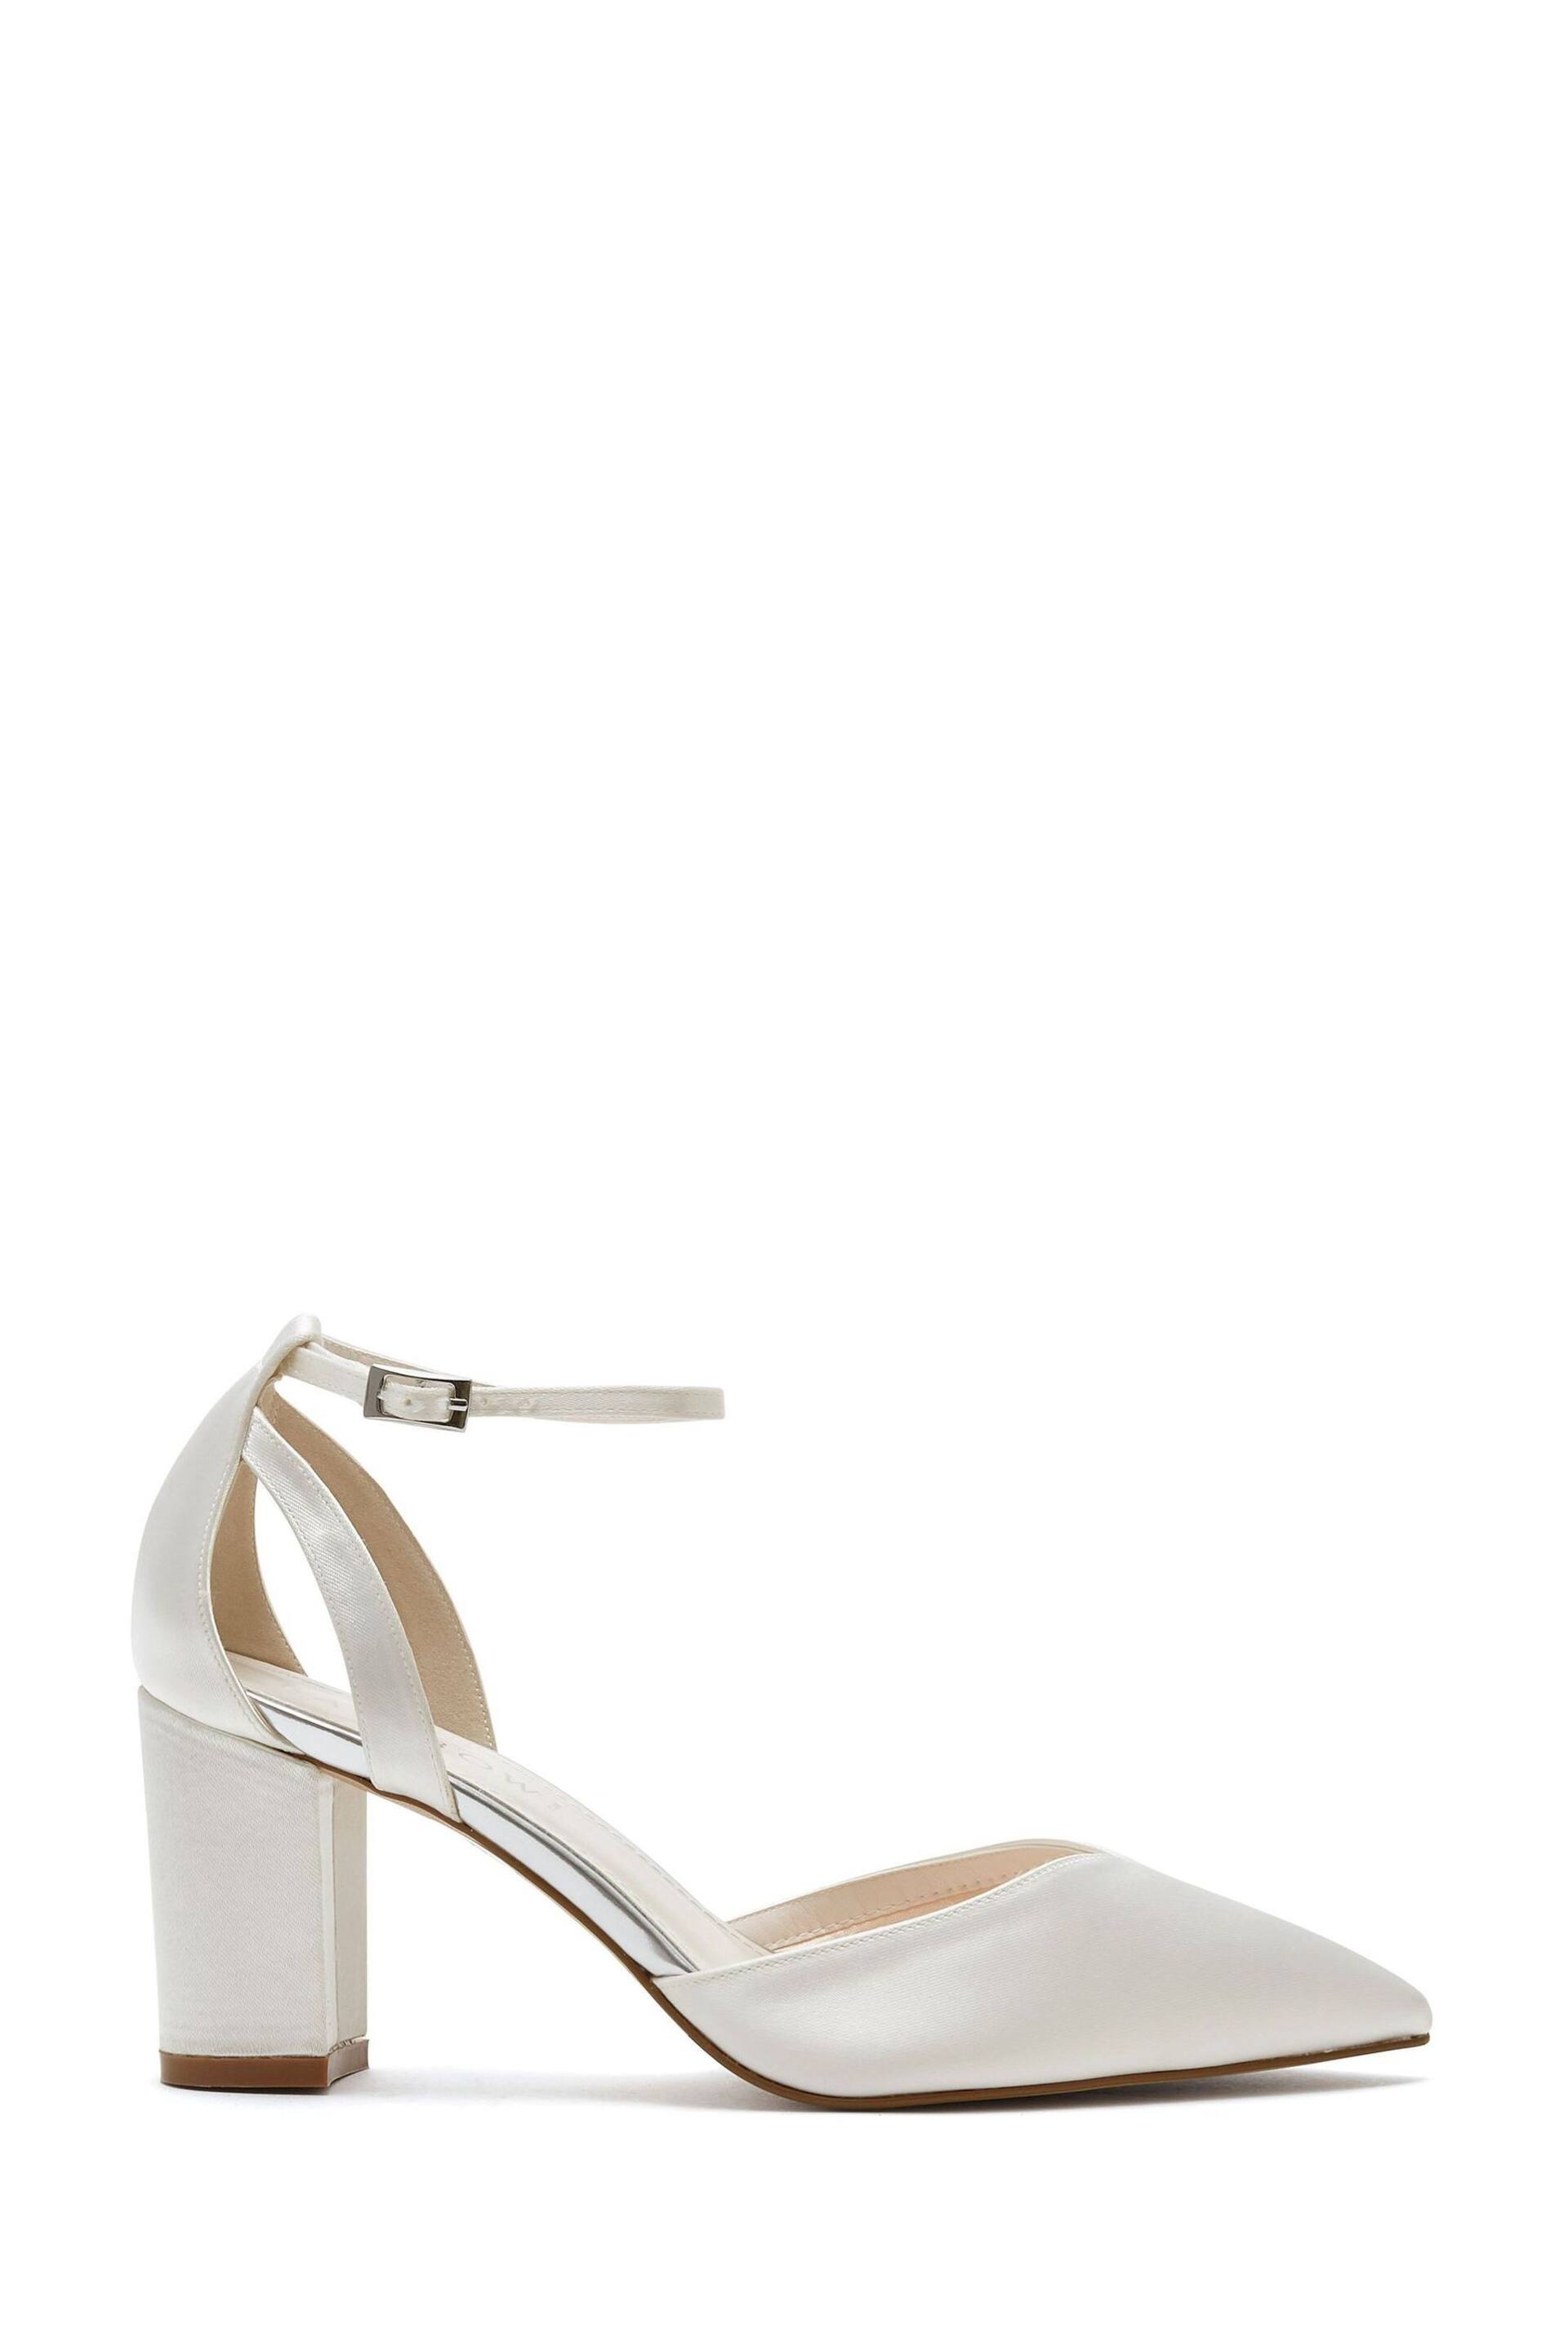 Rainbow Club Natural Bella Wide Fit Ivory Wedding Satin Shoes - Image 3 of 6